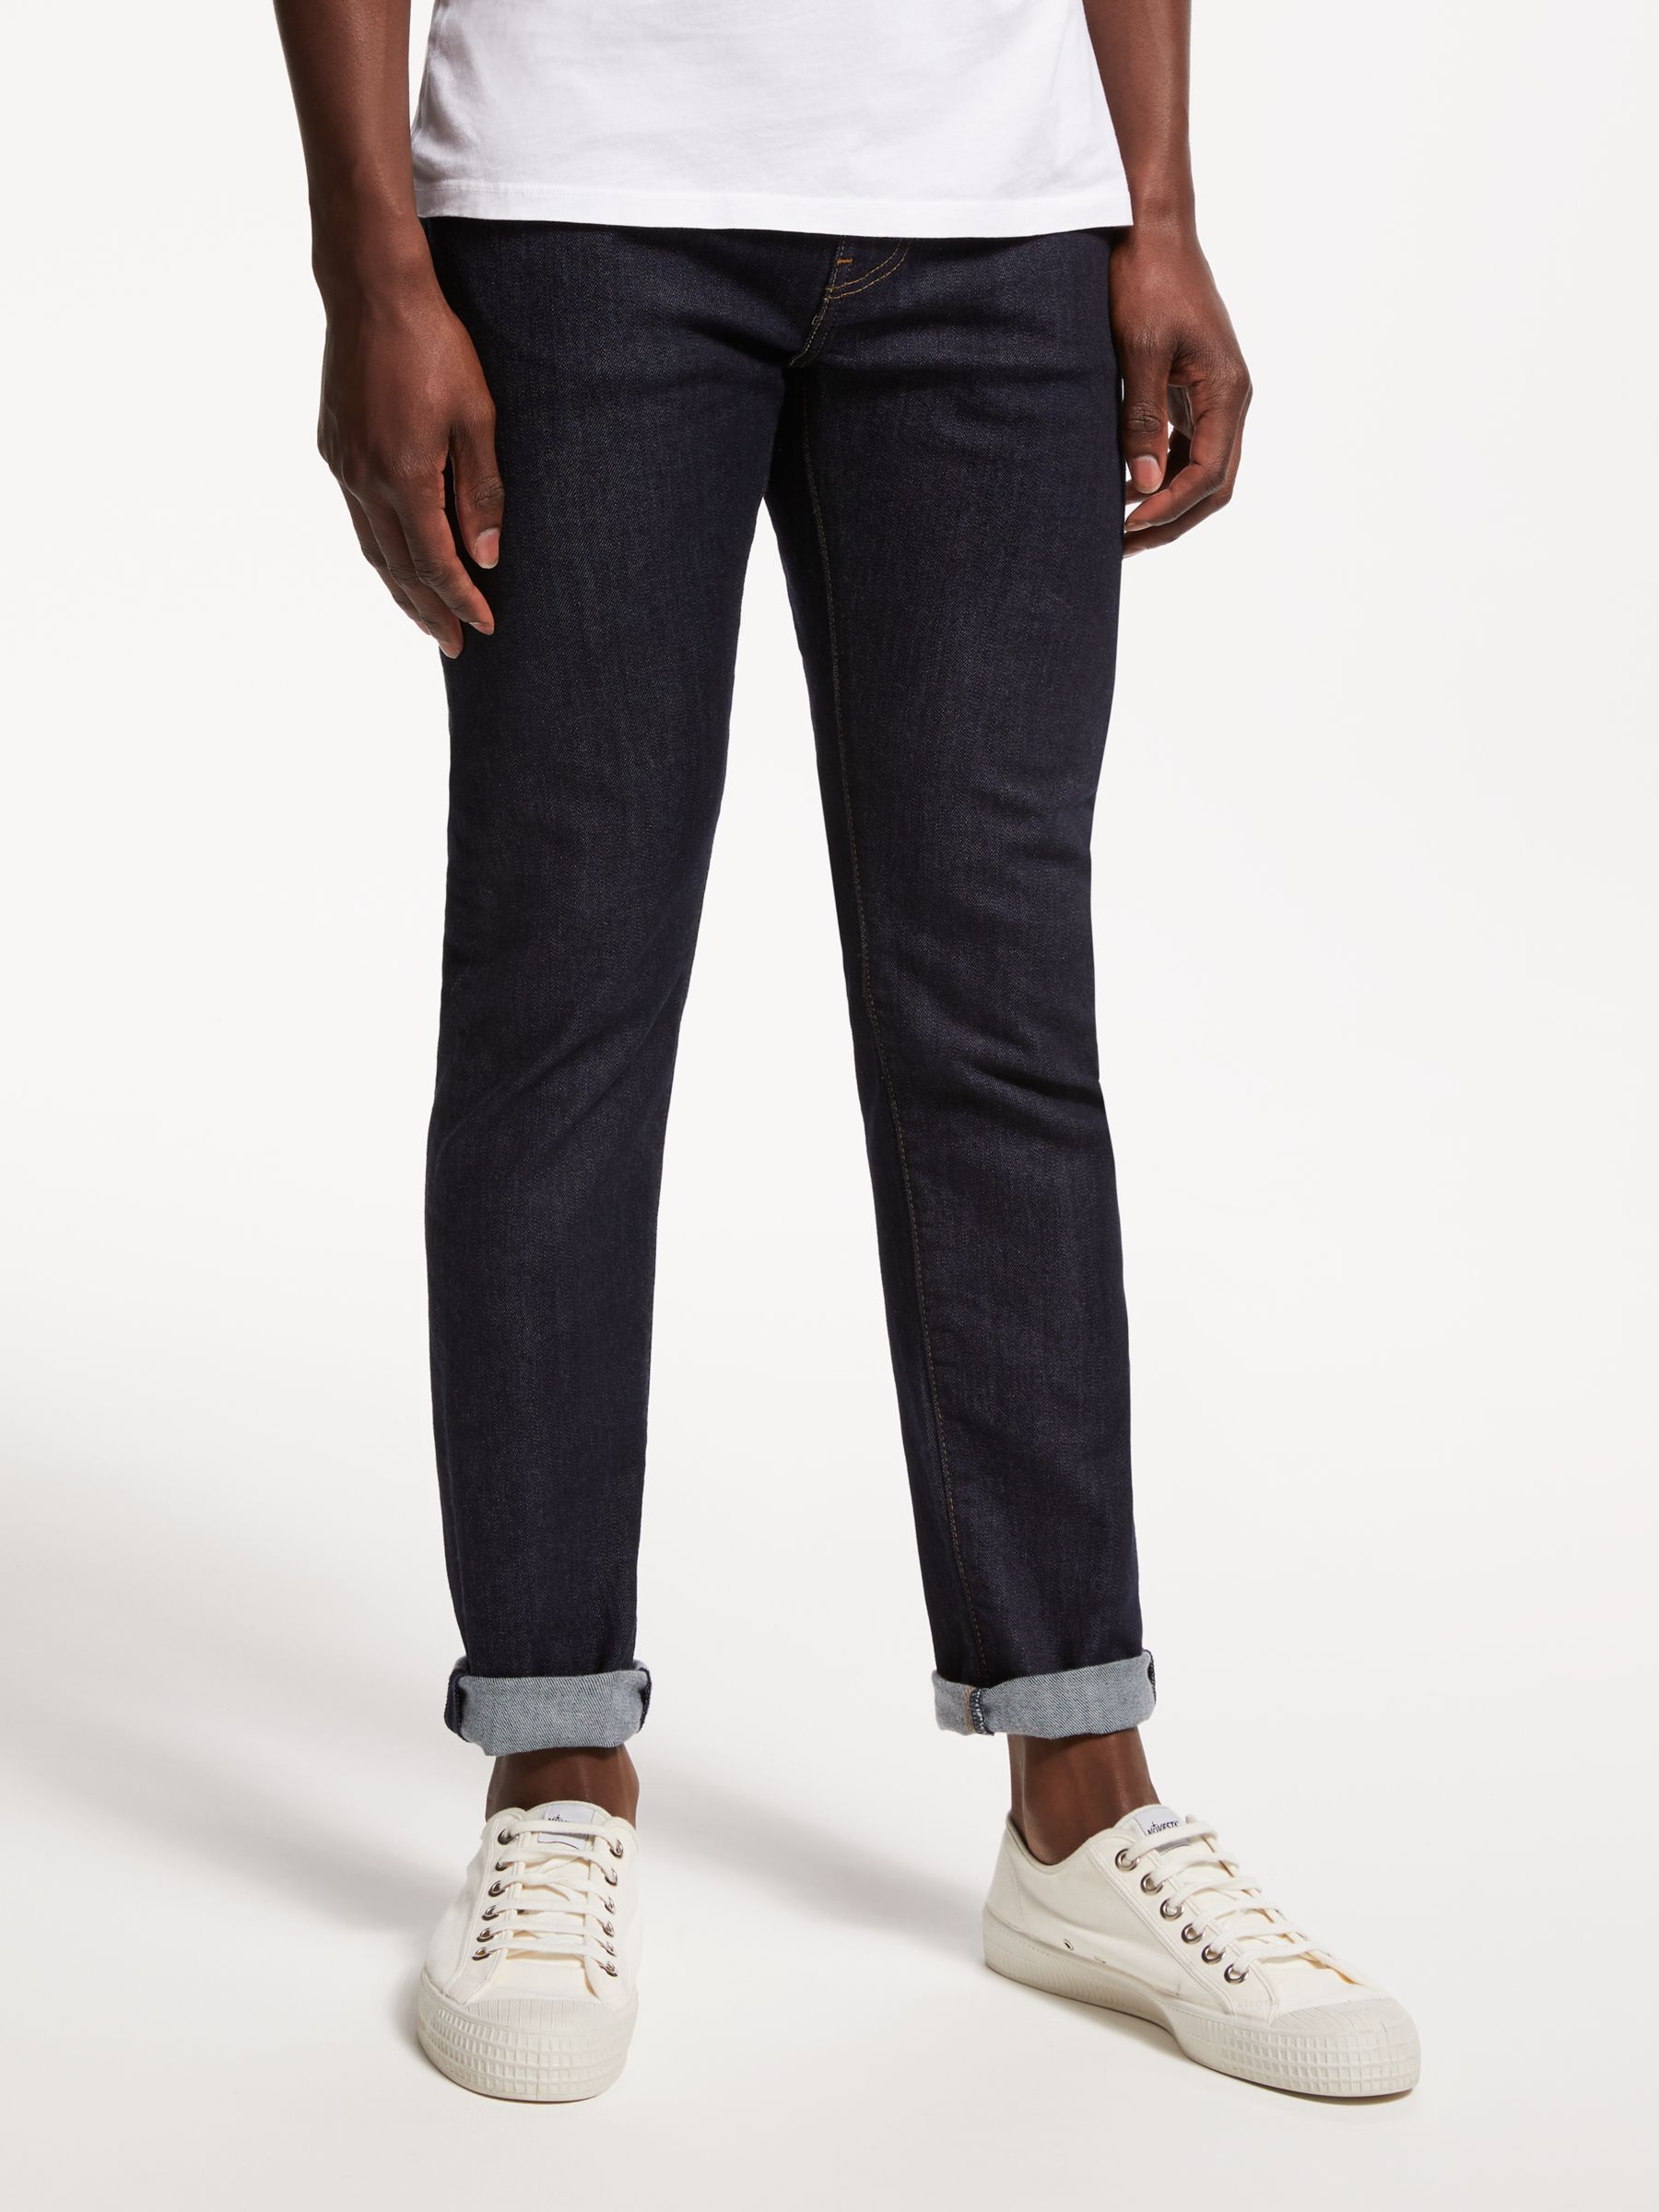 levis 510 cleaner adv